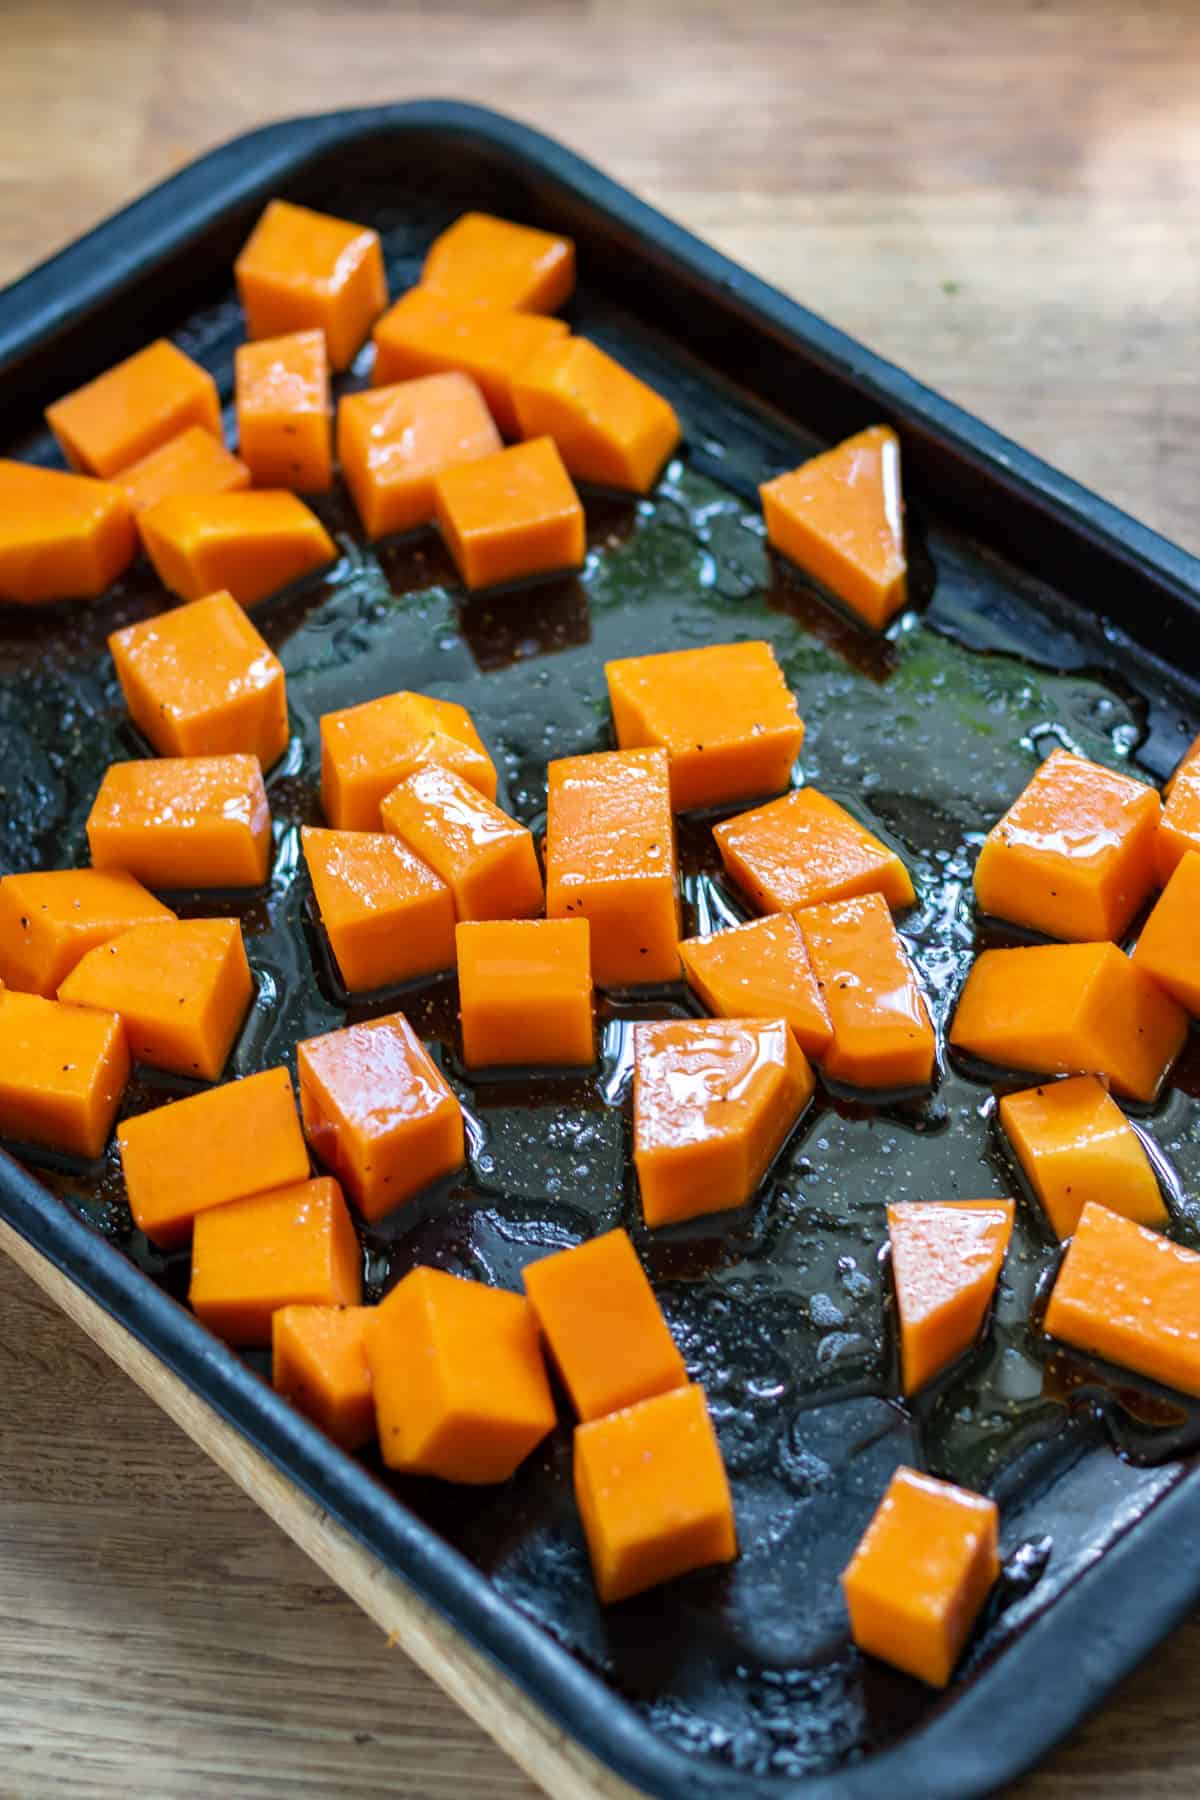 Drizzling cubes of squash with oil and seasonings.